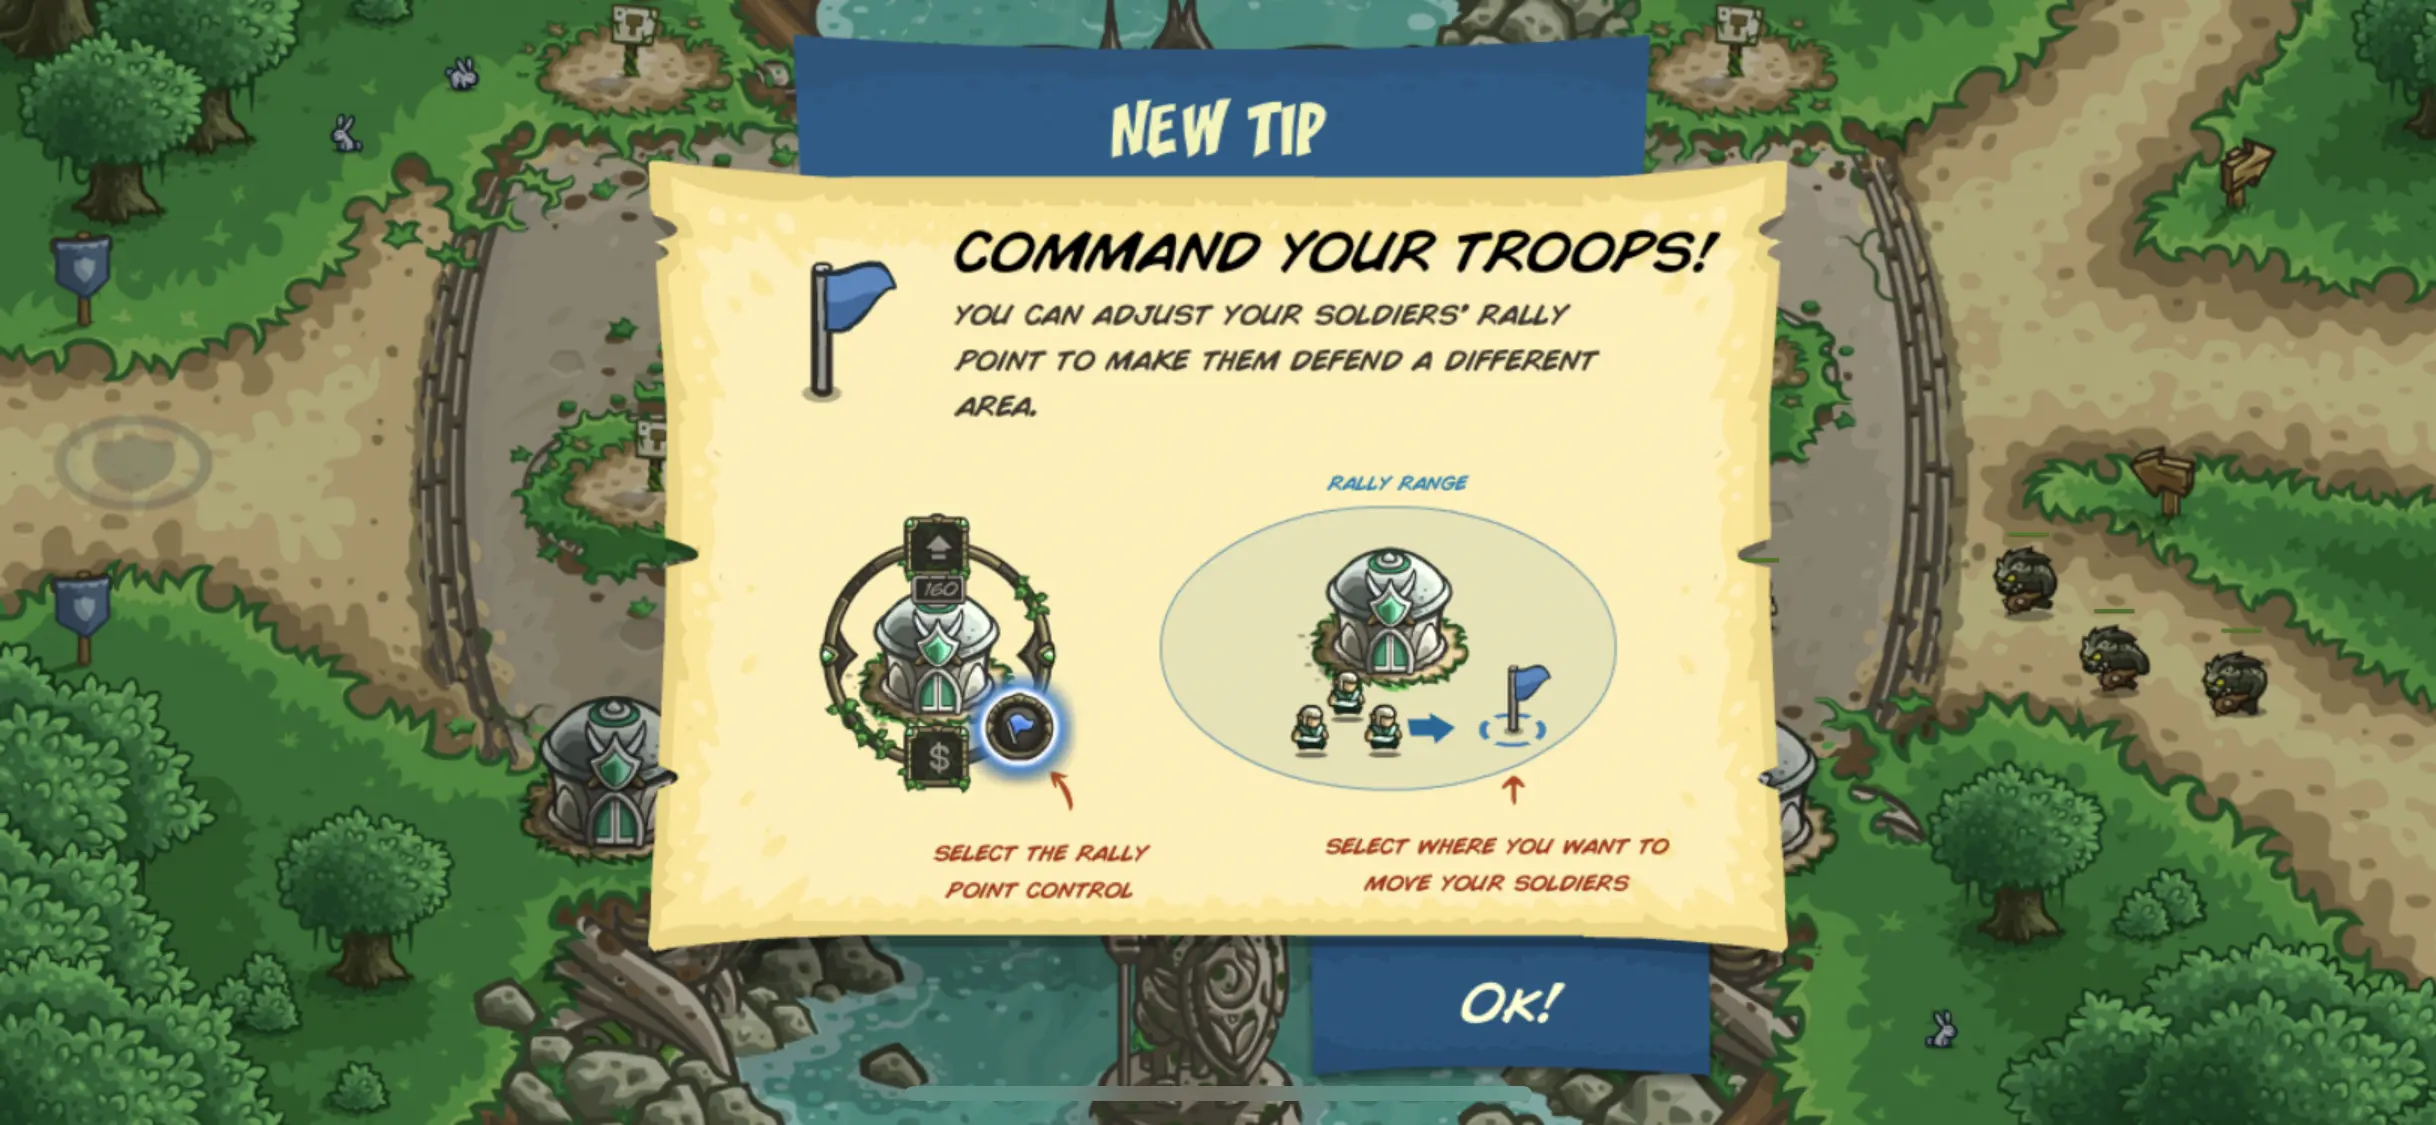 A modal with information about how to move troops around the screen